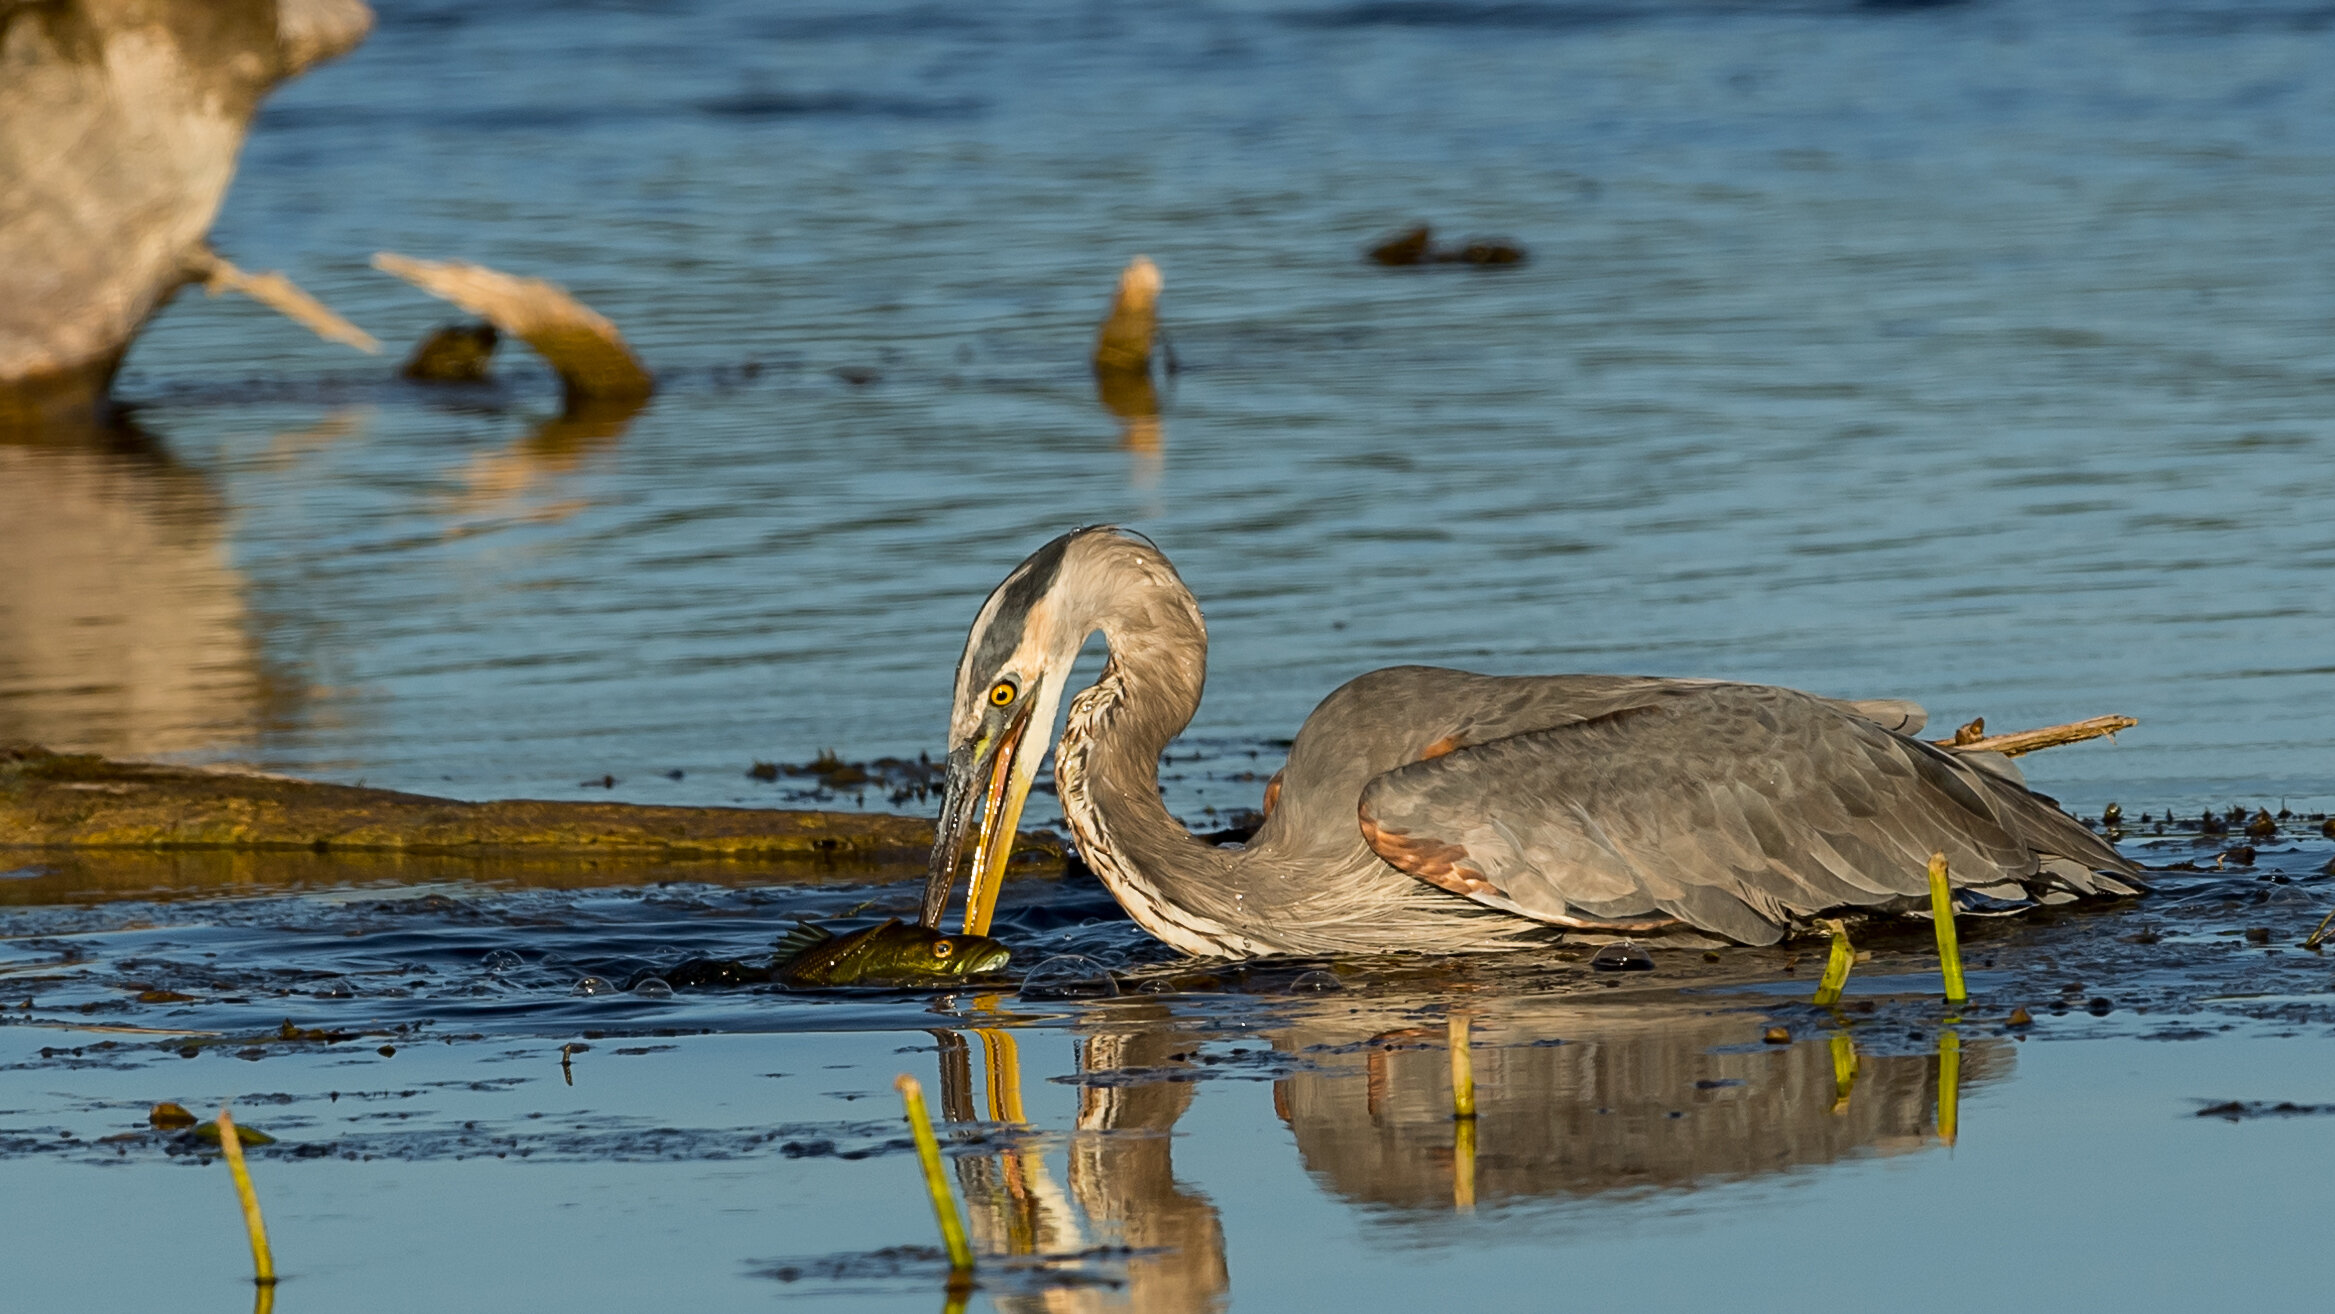 015 The Heron has stabbed a fish and starts to bring it to the surface.jpg